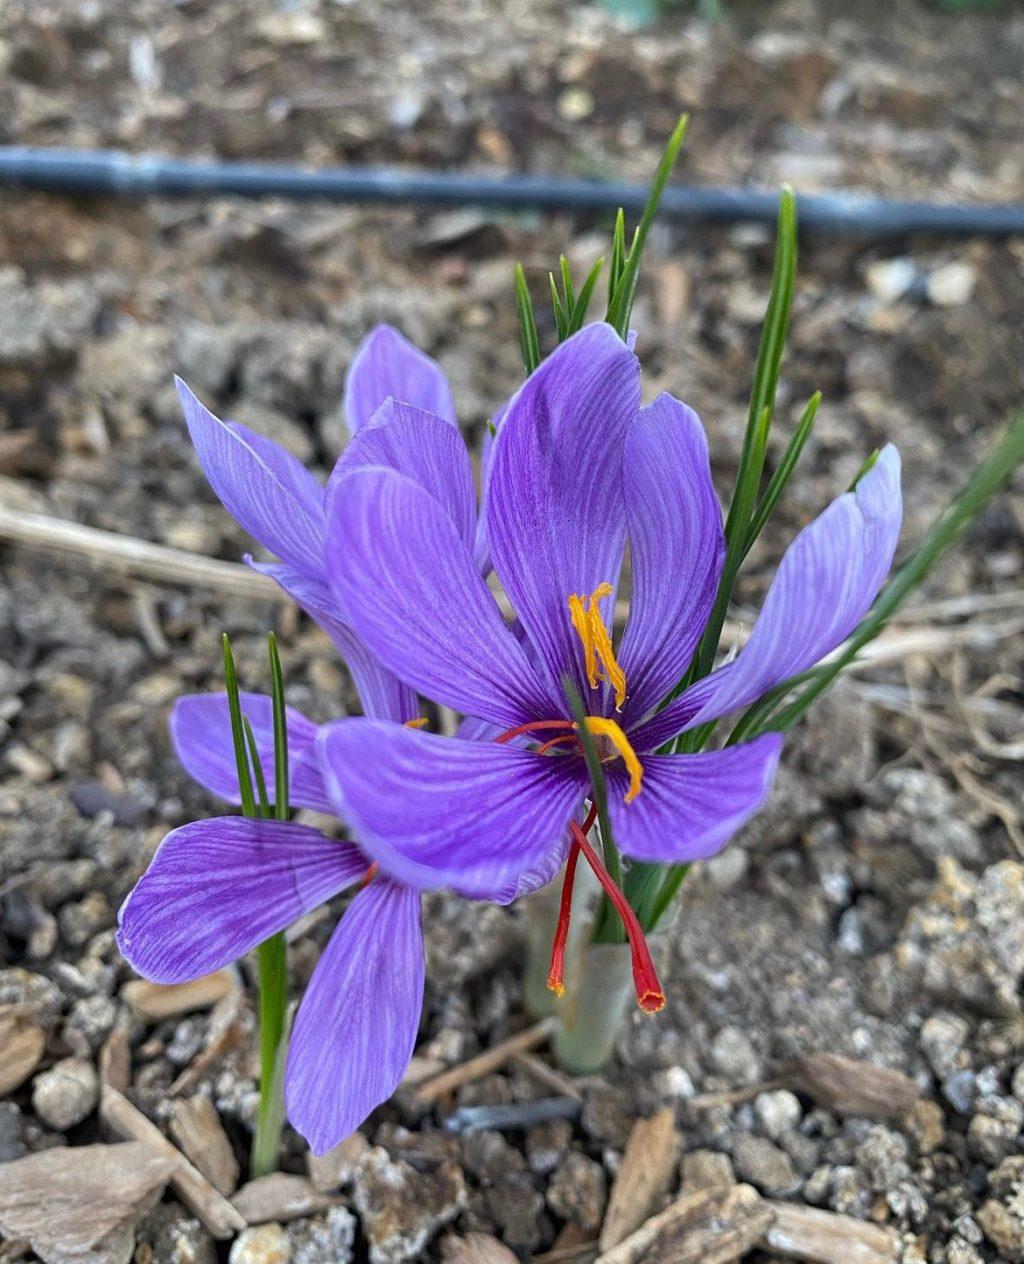 Saffron blooms at the community garden Nov. 3. Saffron is the red thread of this flower, which is used to season food and color textiles. Photo courtesy of Mallory Finley